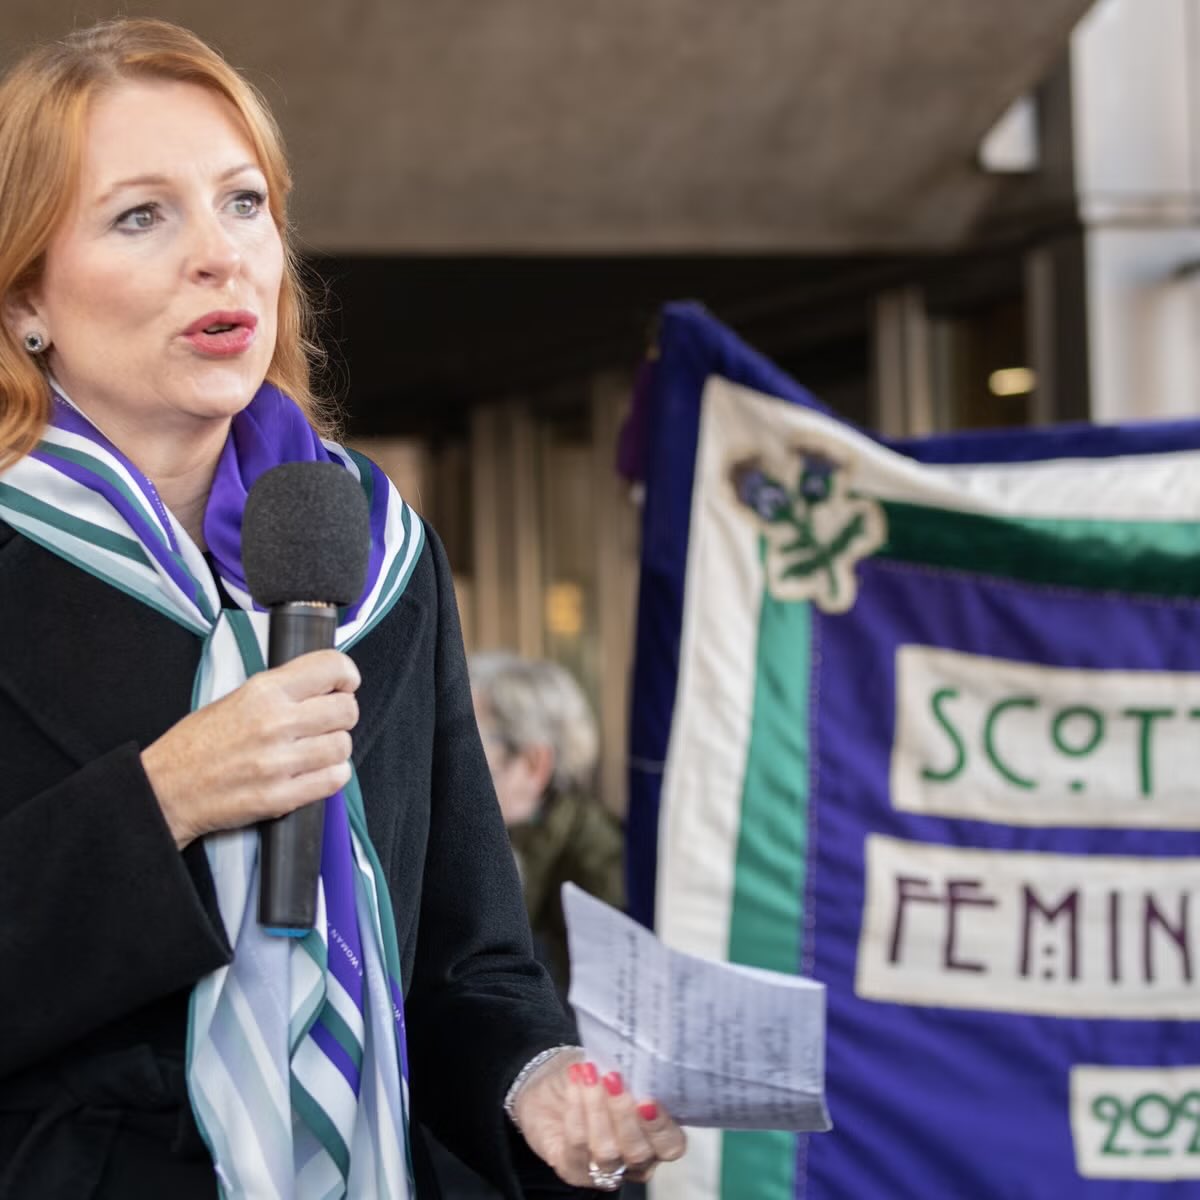 No matter what happens tomorrow or over the weekend, Ash Regan will continue to enjoy the sisterhood and solidarity of women across Scotland and rUK. When courage called she resigned from govt to stand up for women’s rights and remains steadfast to the cause. 💚🤍💜